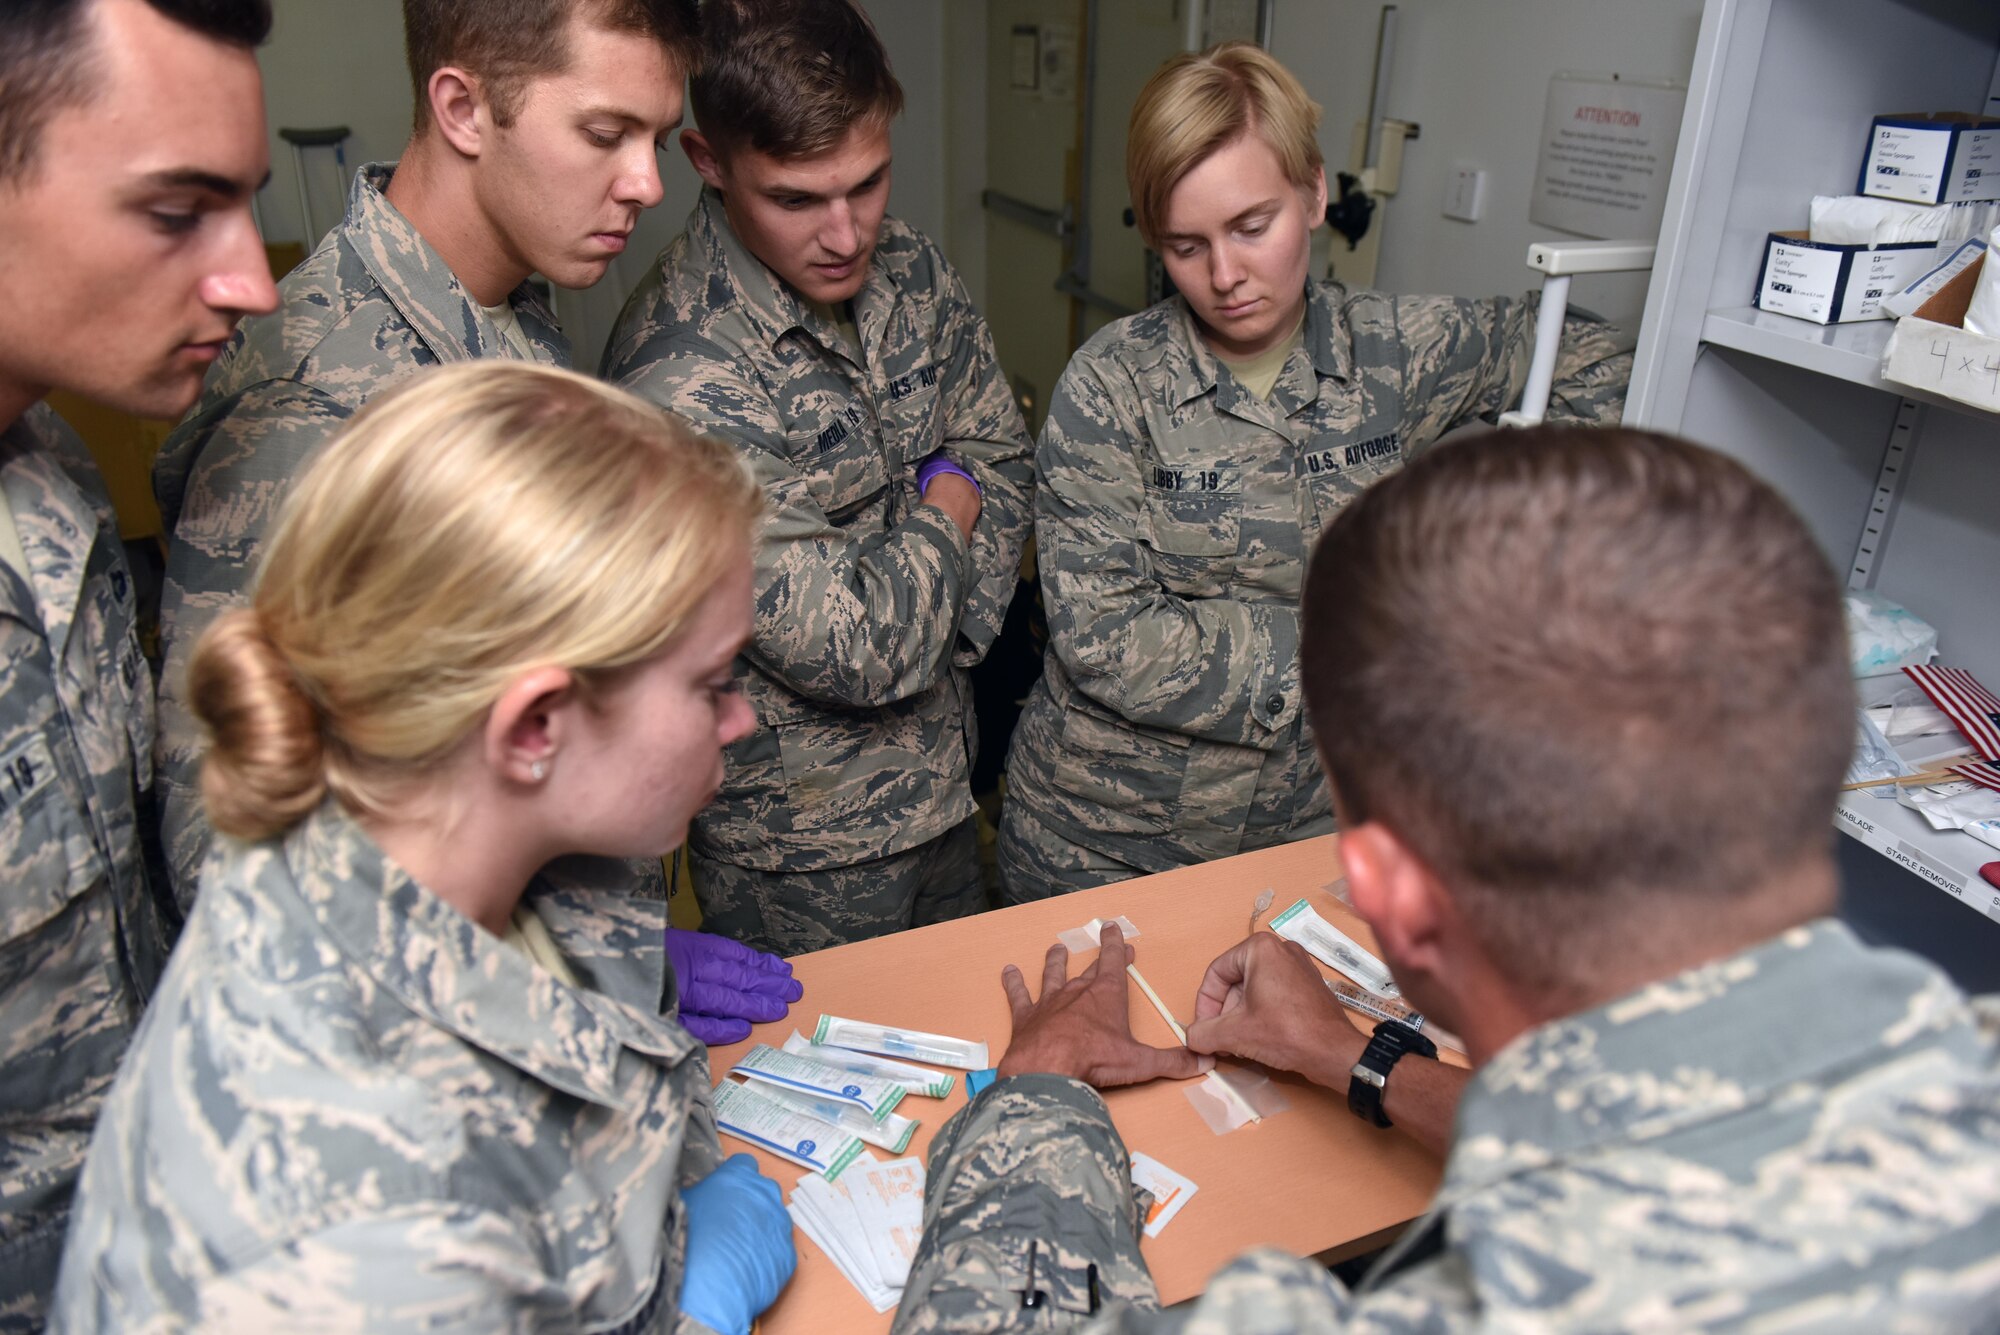 Tech. Sgt. Ryan Folks, squadron medical element of the 27th Expeditionary Fighter Squadron, demonstrates how to start an IV using a drinking straw to U.S. Air Force Academy cadets at an undisclosed location in southwest Asia, July 6, 2017. Cadets visited the 380th Air Expeditionary Wing and embedded with multiple units across the installation to see firsthand how separate elements of the mission fit into the whole. (U.S. Air Force photo by Staff Sgt. Marjorie A. Bowlden)